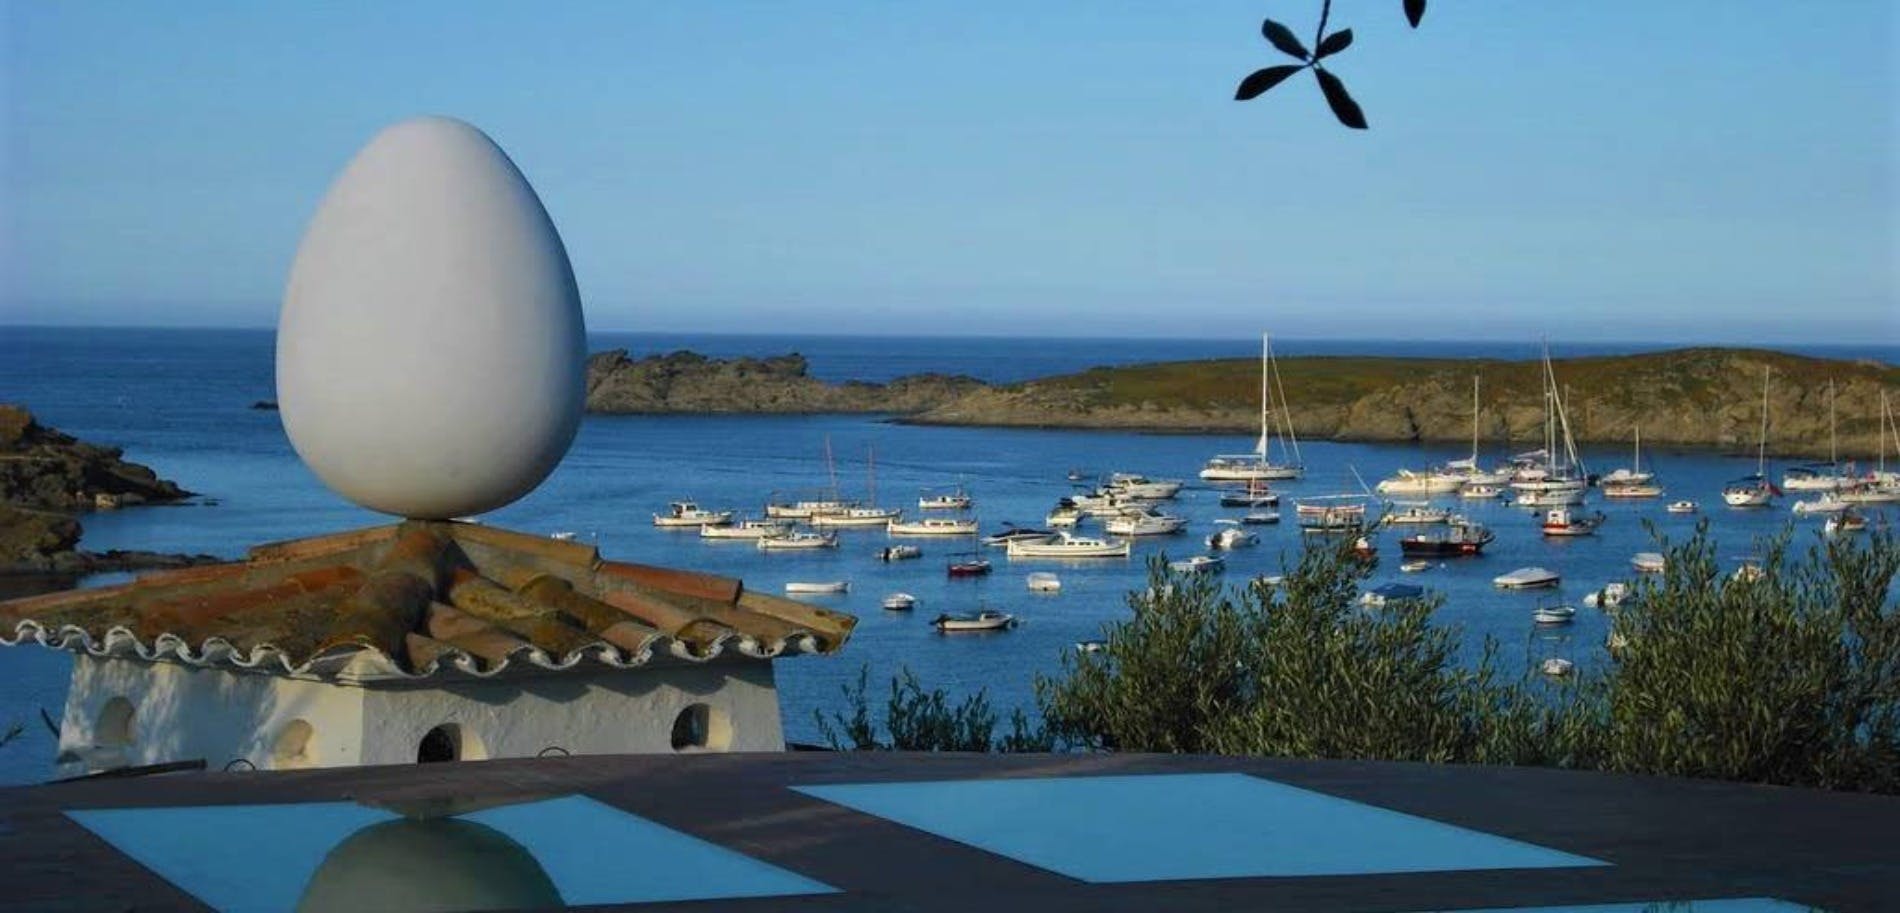 Dalí Museum, Figueres and Cadaqués private tour from Barcelona